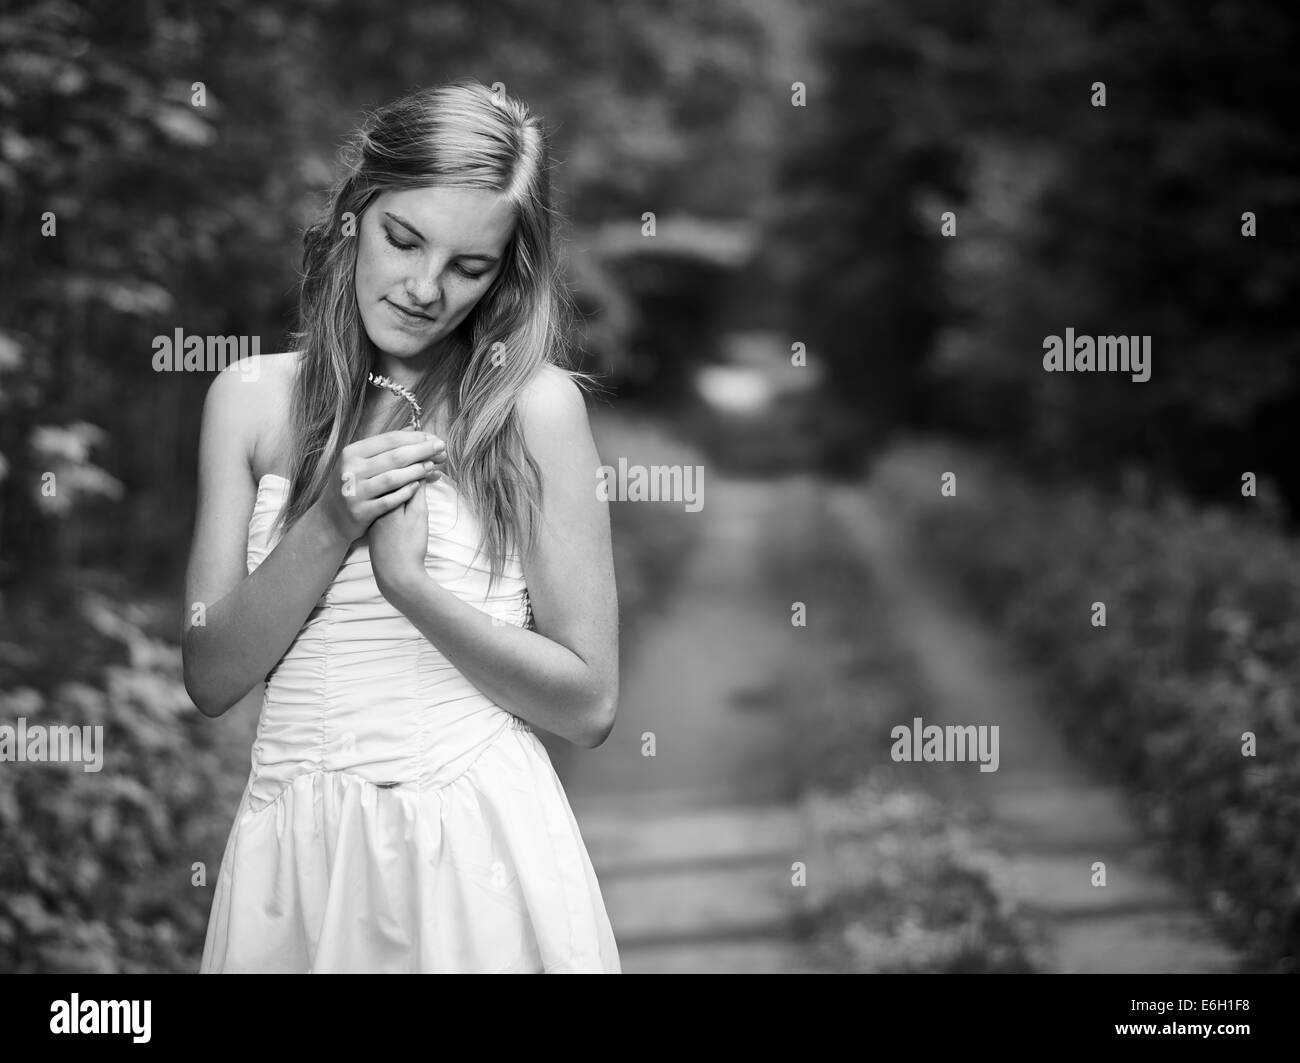 Natural beautiful young woman, rural landscape on background, black and white image Stock Photo